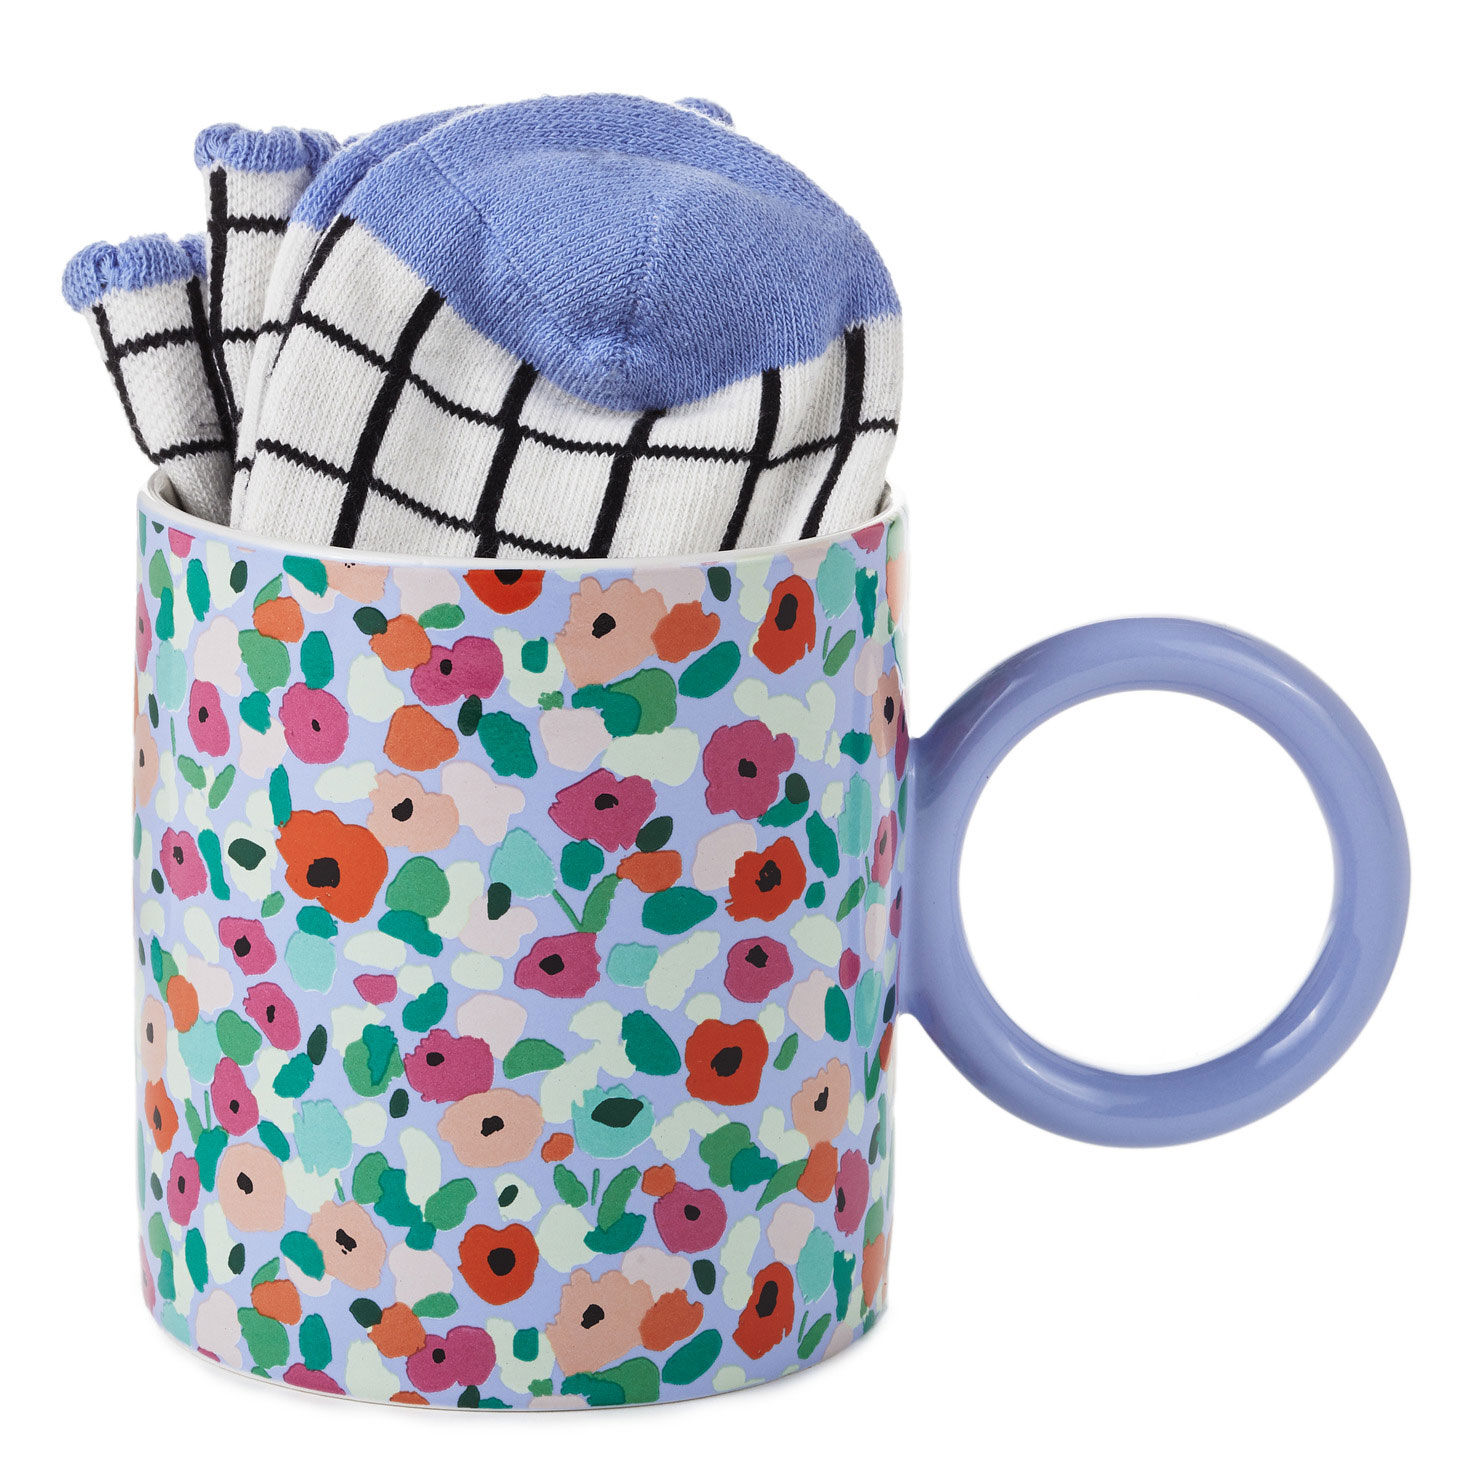 Abstract Floral Mug With Crew Socks, Set of 2 for only USD 24.99 | Hallmark